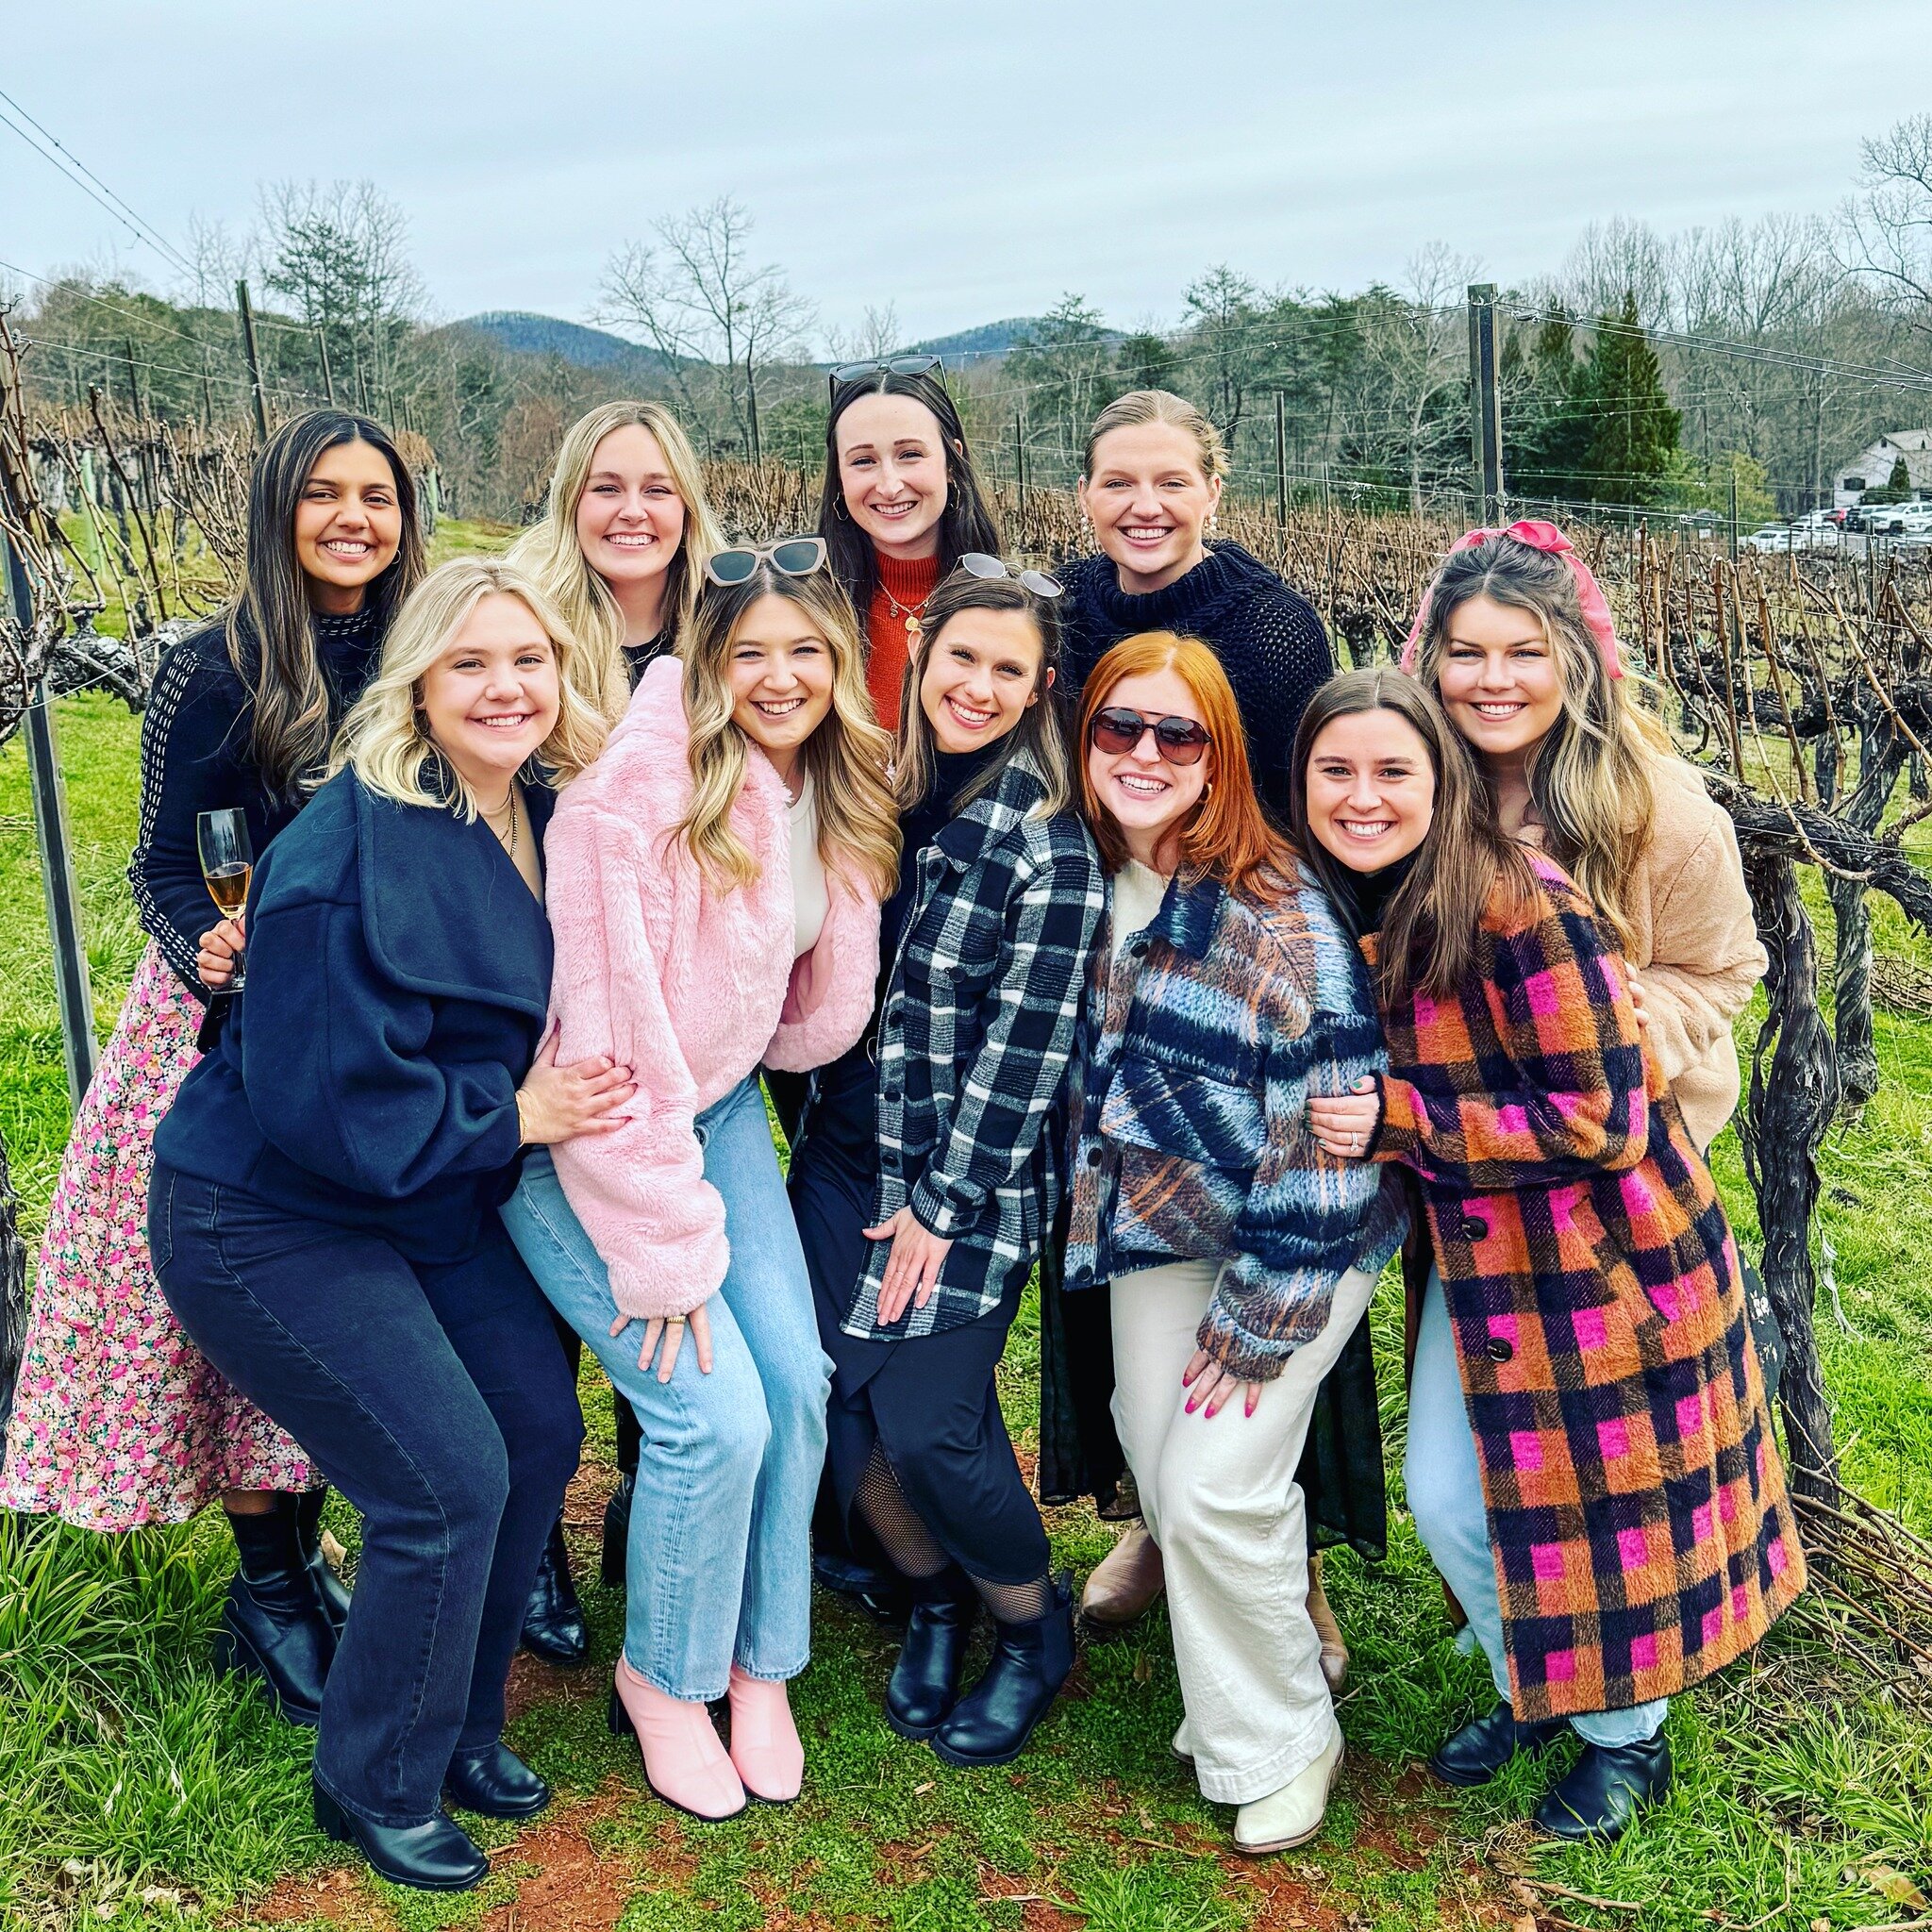 3rd year in a row for this group! Pick-up / drop off in Sautee. Itinerary: @wolfmountainvineyards @kayavineyards @cottagevineyard 

#northgawinetours #discoverdahlonega #dahlonegaga #winetour #northga #northgawinecountry #winetasting